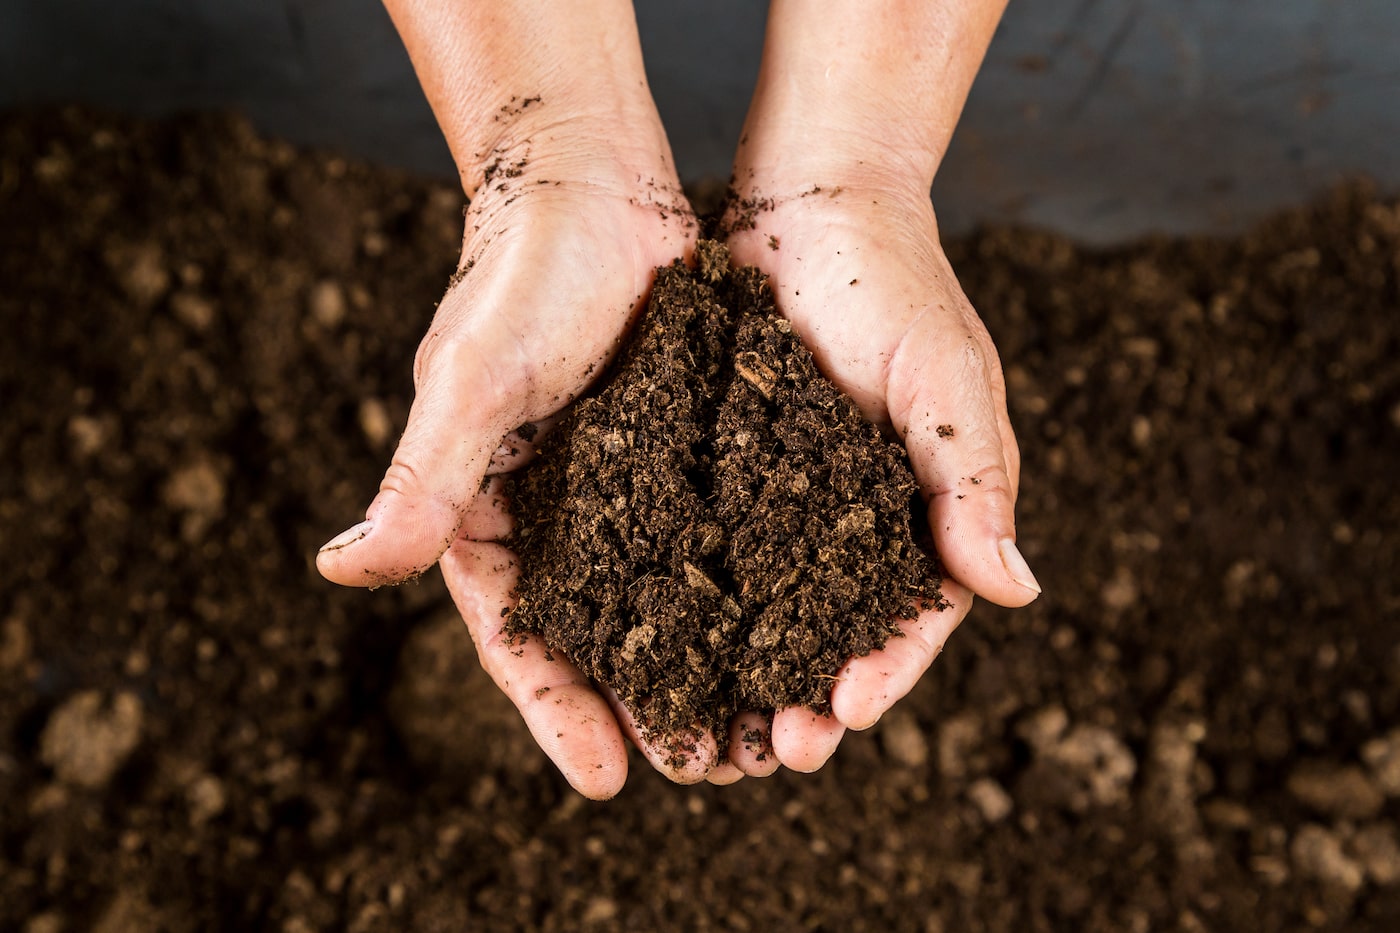 Pros and Cons of Composting